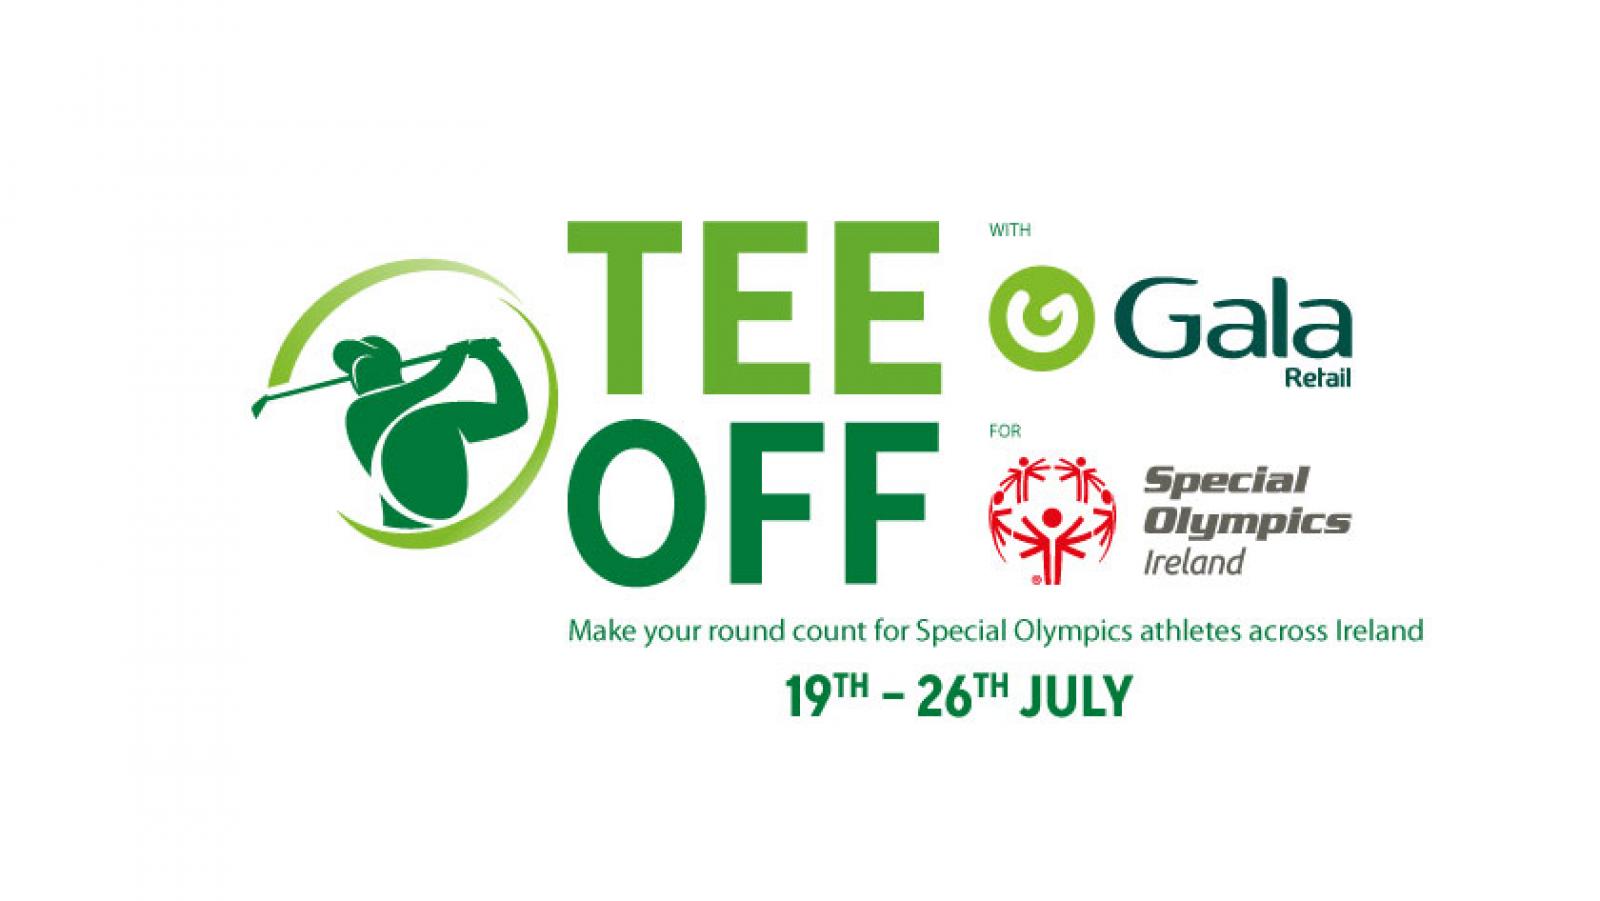 Tee off with Gala Retail